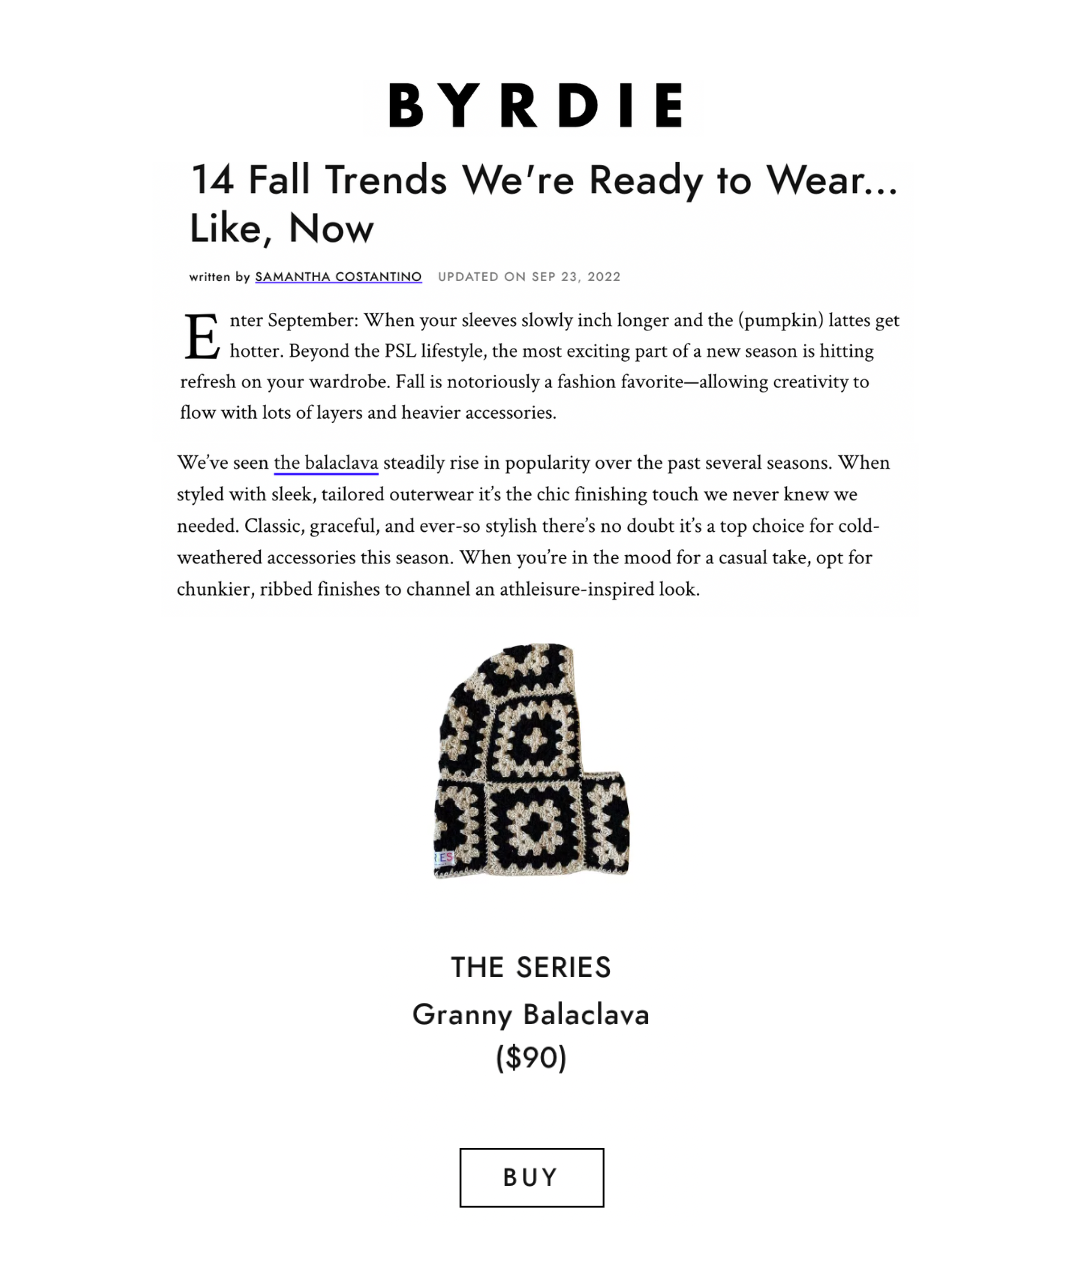 BYRDIE | 14 Fall Trends We're Ready to Wear... Like, Now